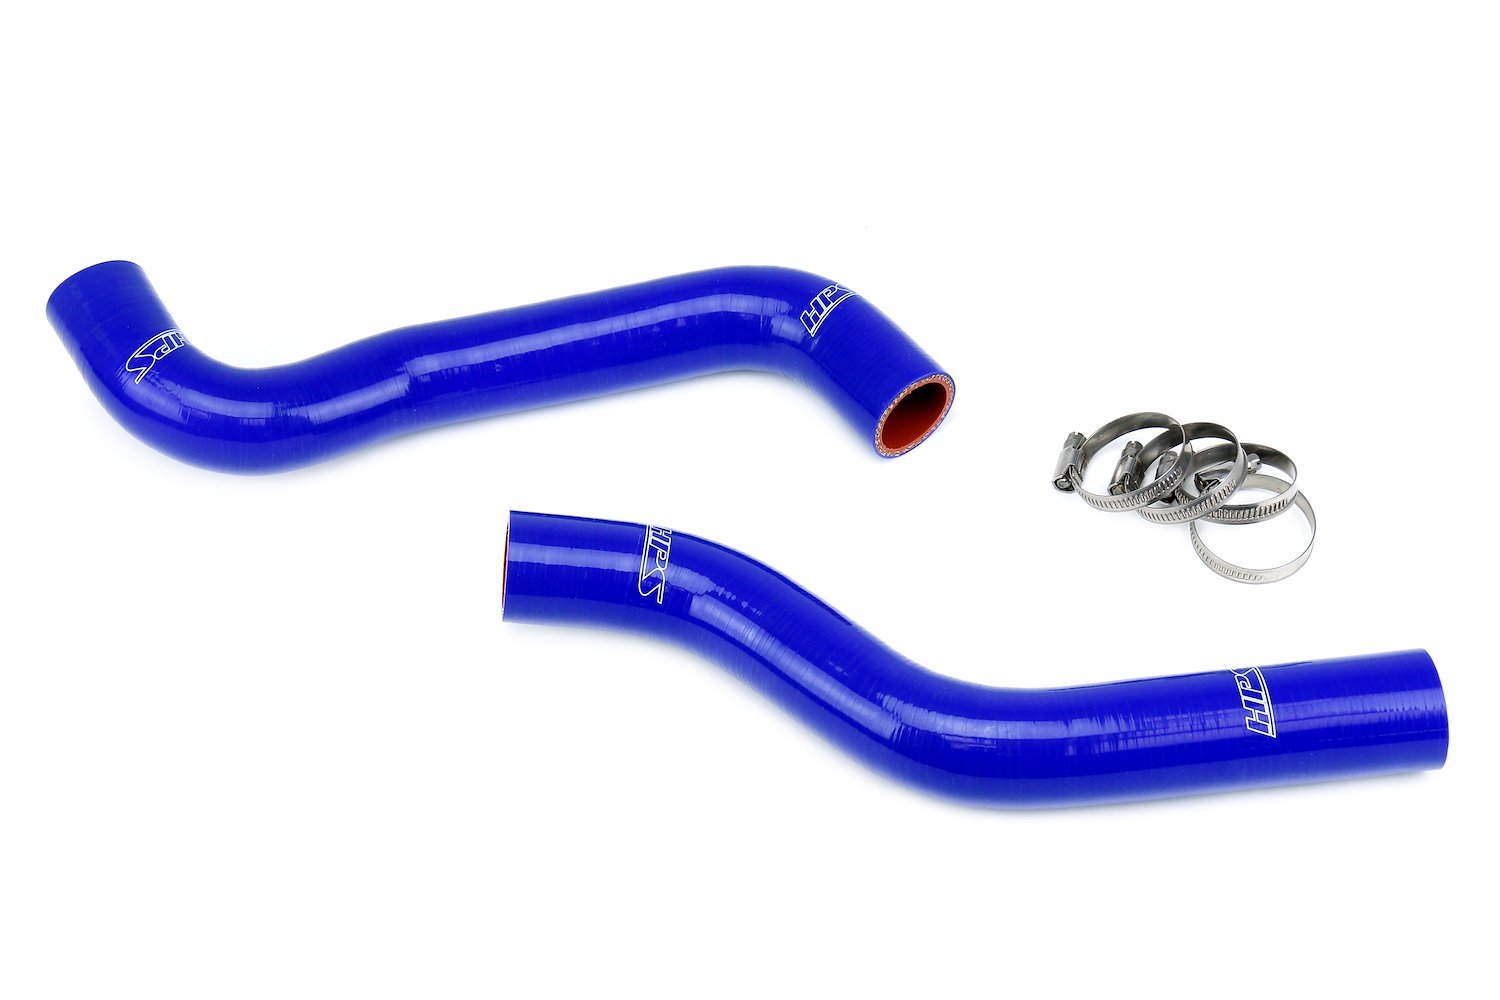 57-1887-BLUE Radiator Hose Kit, 3-Ply Reinforced Silicone, Replaces Rubber Radiator Hoses